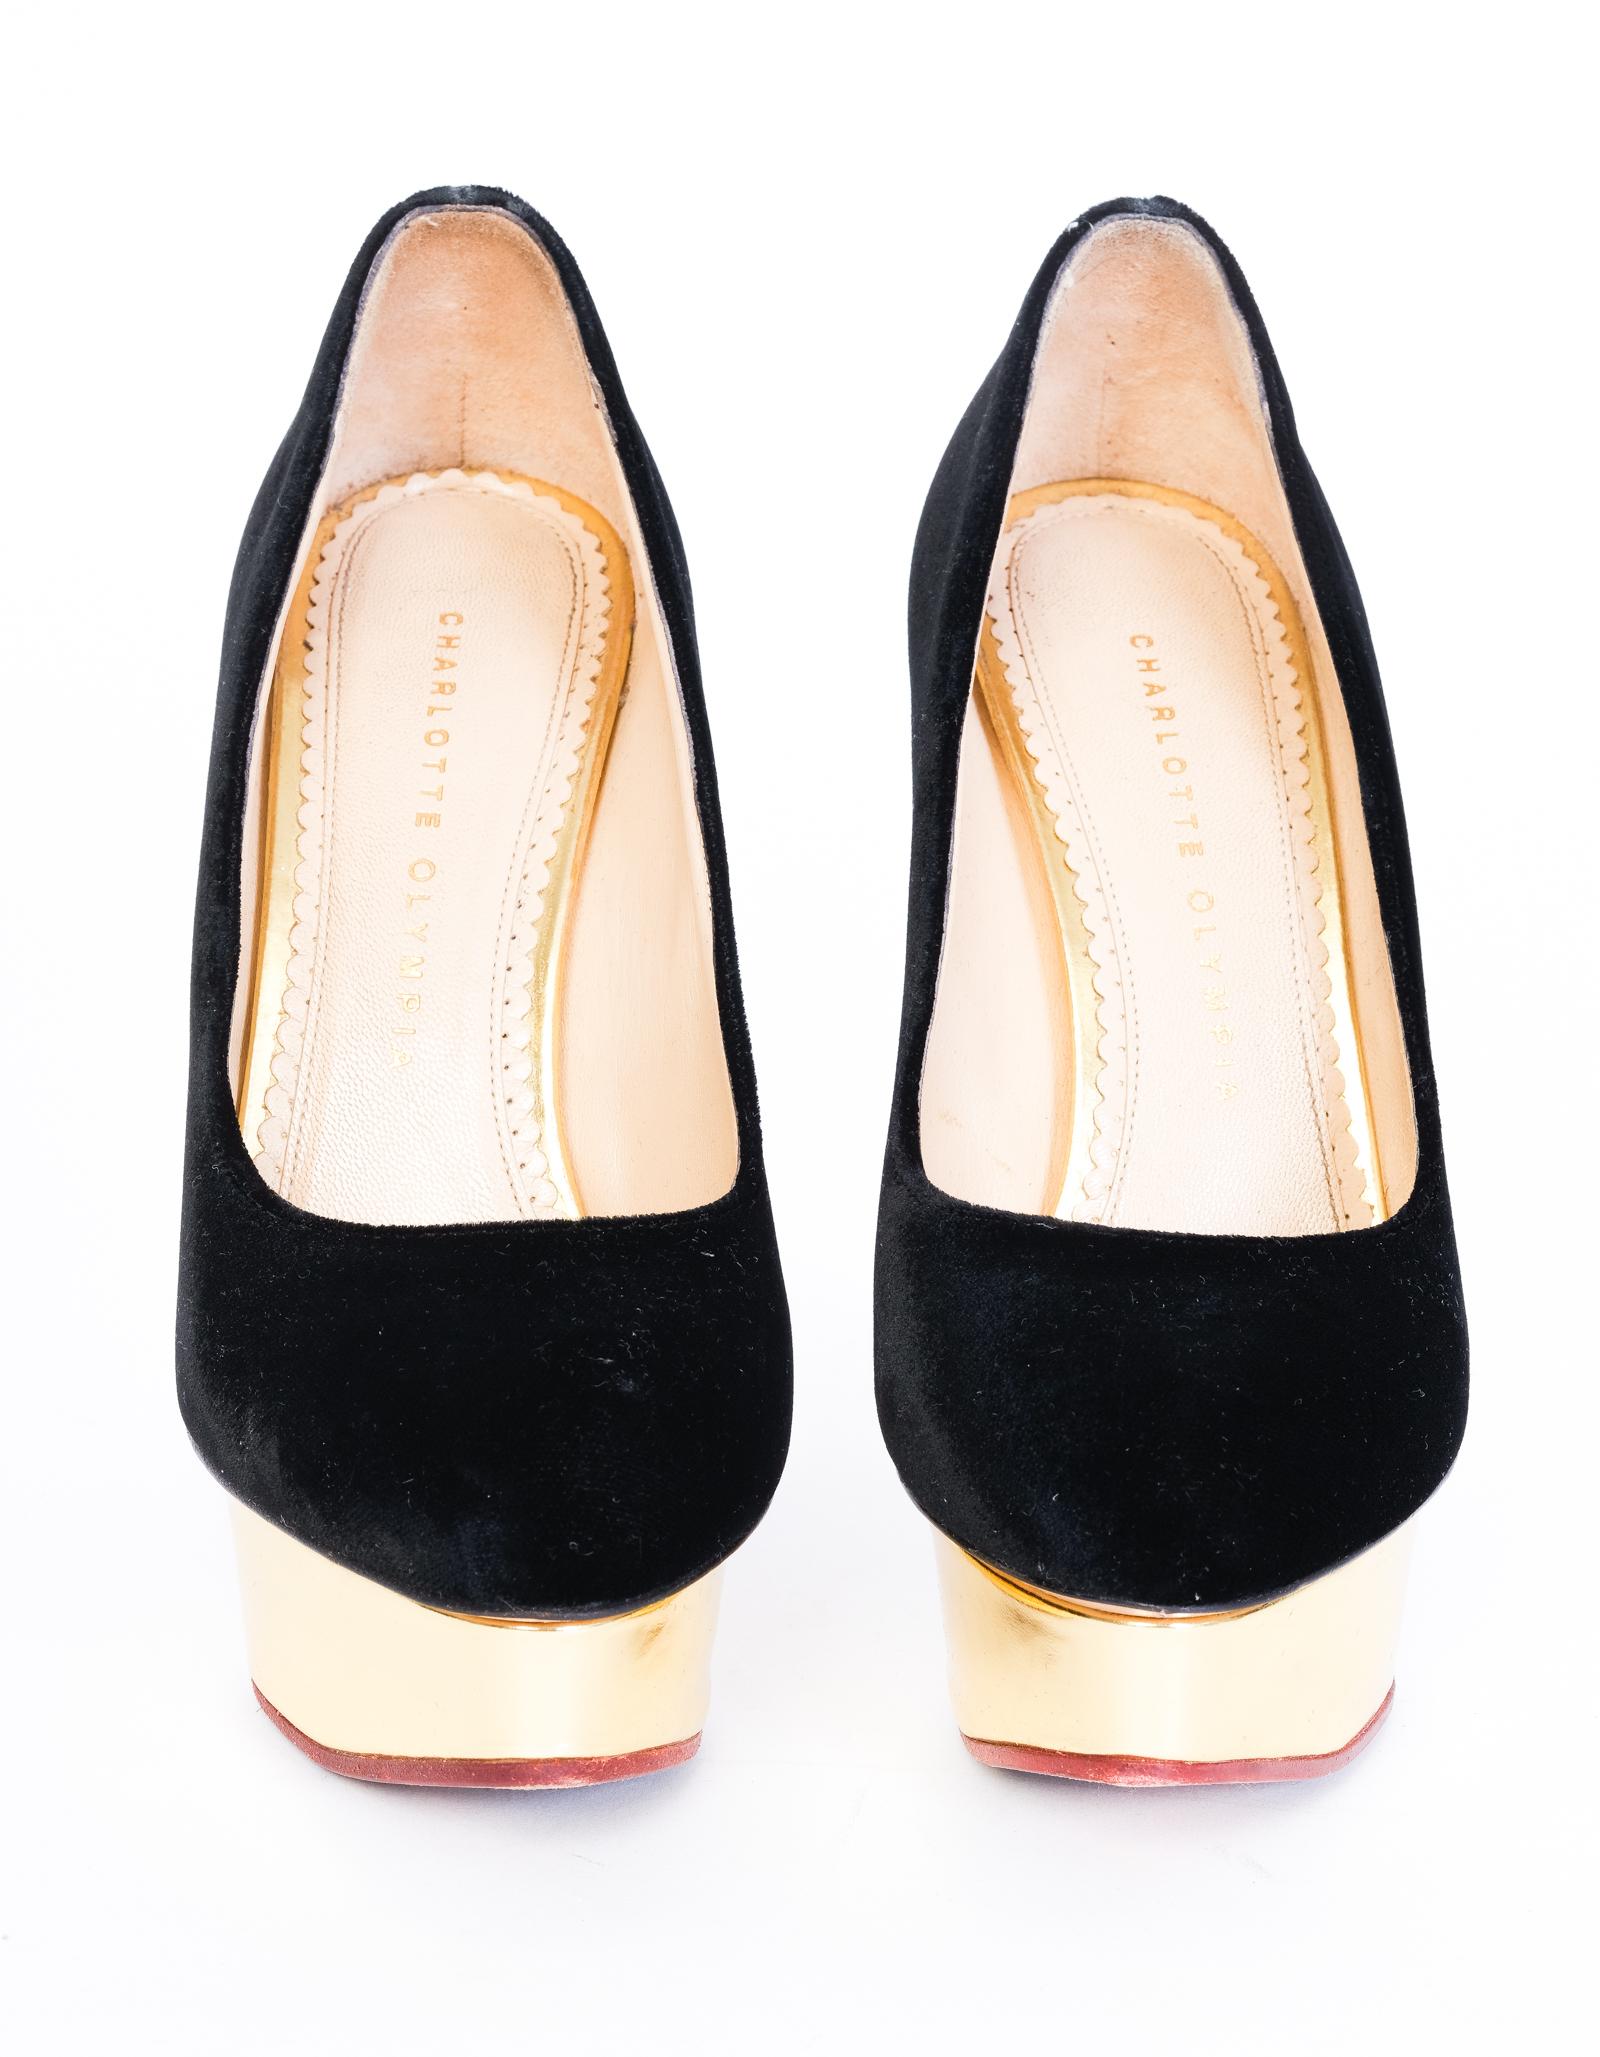 Charlotte Olympia Dolly black suede heels with metallic platforms in Women's EU 37.5 / 6.5 US. Featuring a black suede exterior and heels with a hight of 5.5 inches, a beige leather interior and bottom, gold toned platforms with a height of 1.5